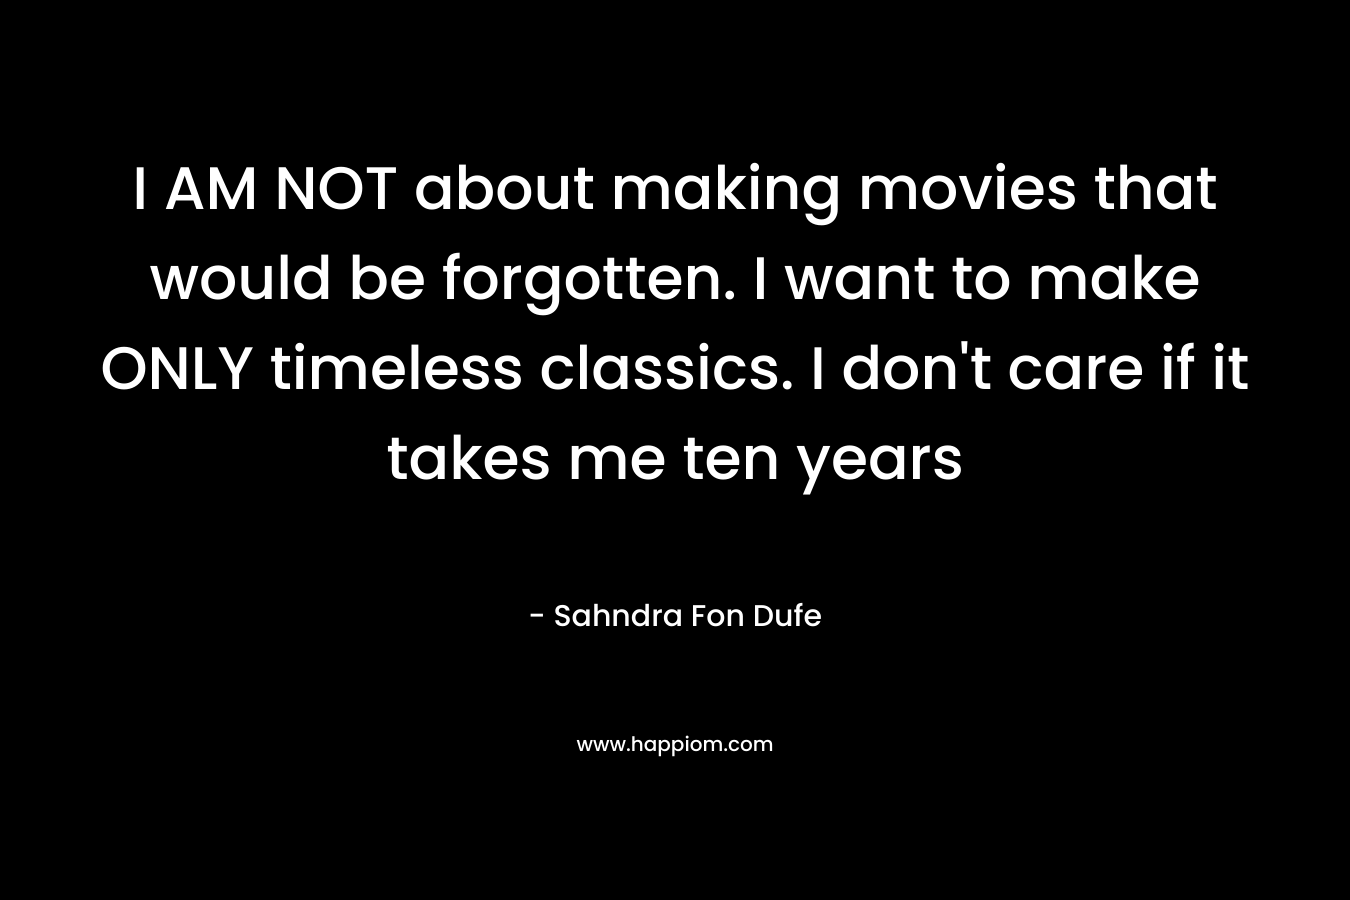 I AM NOT about making movies that would be forgotten. I want to make ONLY timeless classics. I don’t care if it takes me ten years – Sahndra Fon Dufe